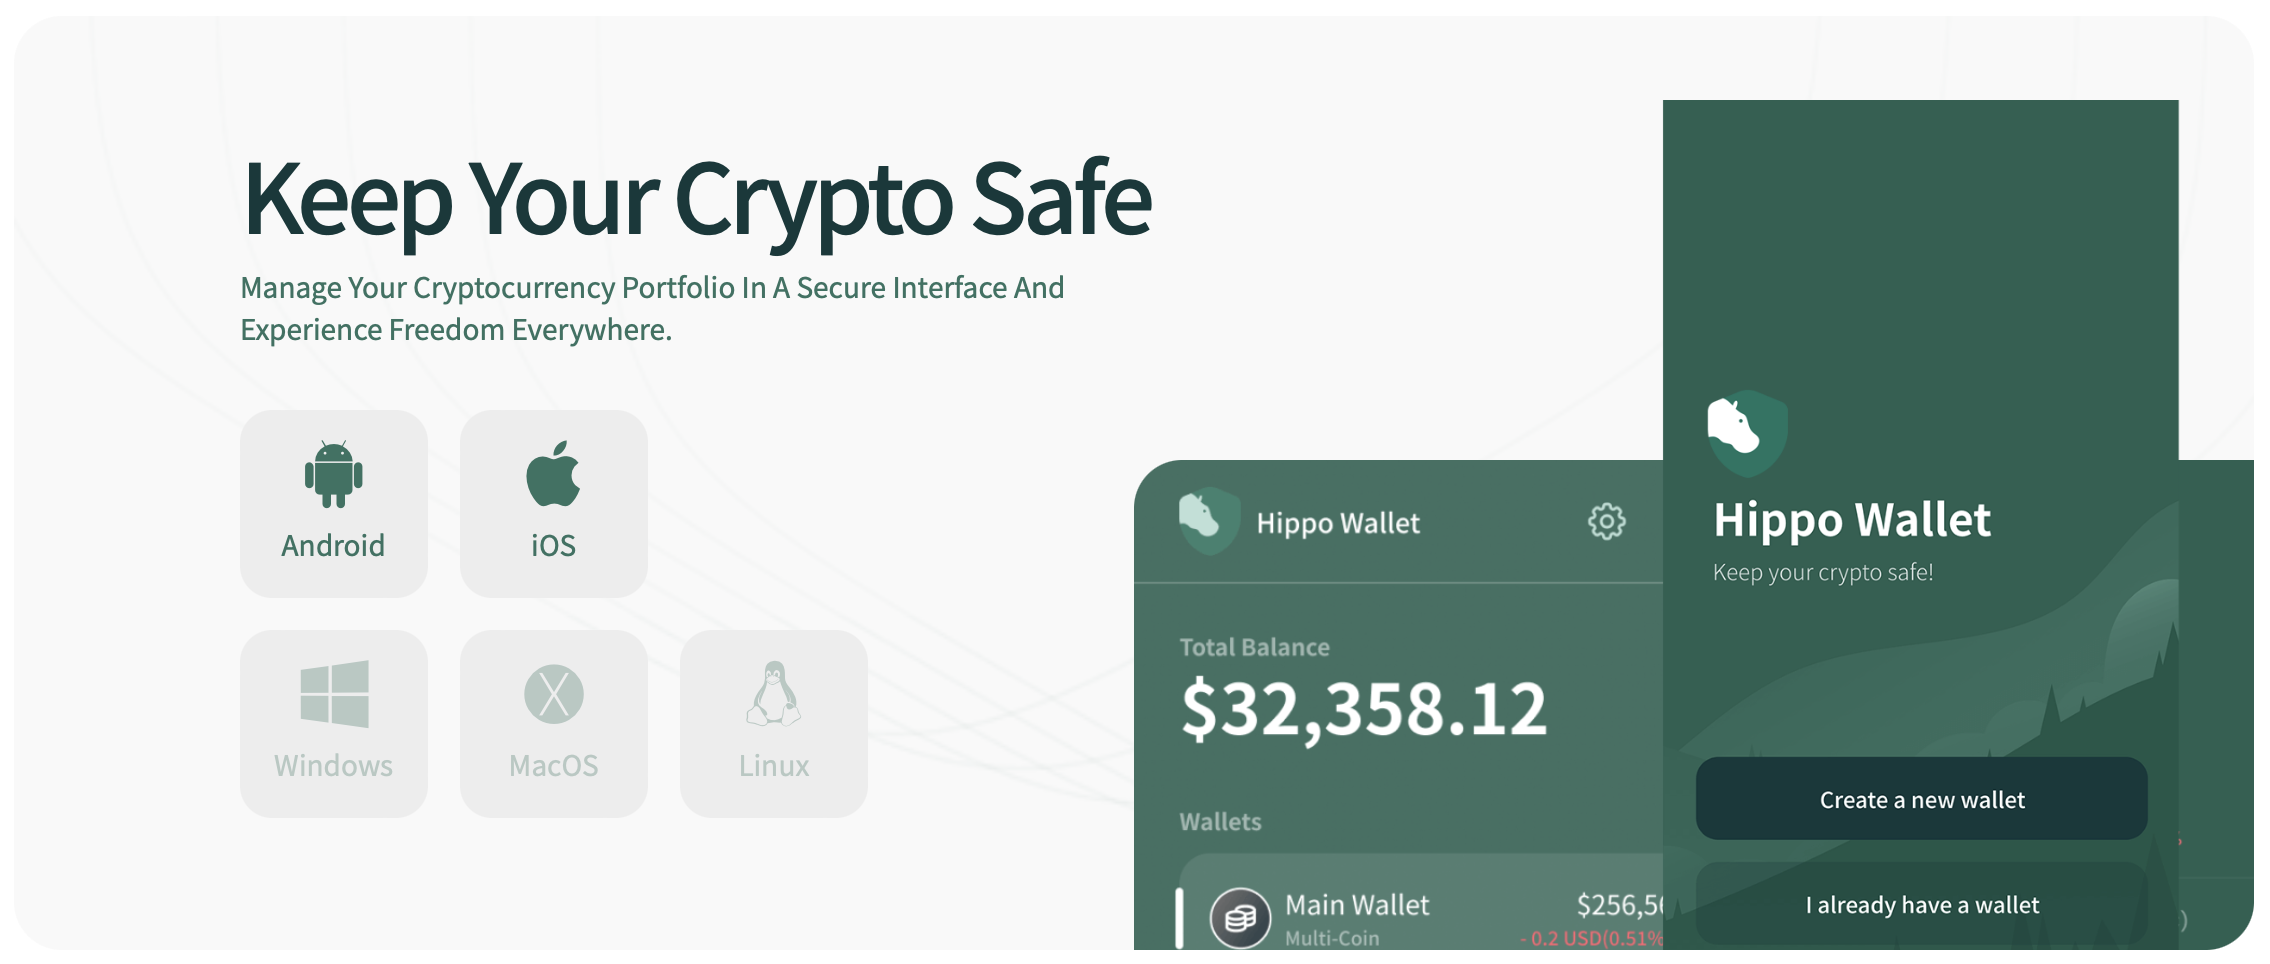 Hippo Wallet: The most trusted & secured crypto wallet